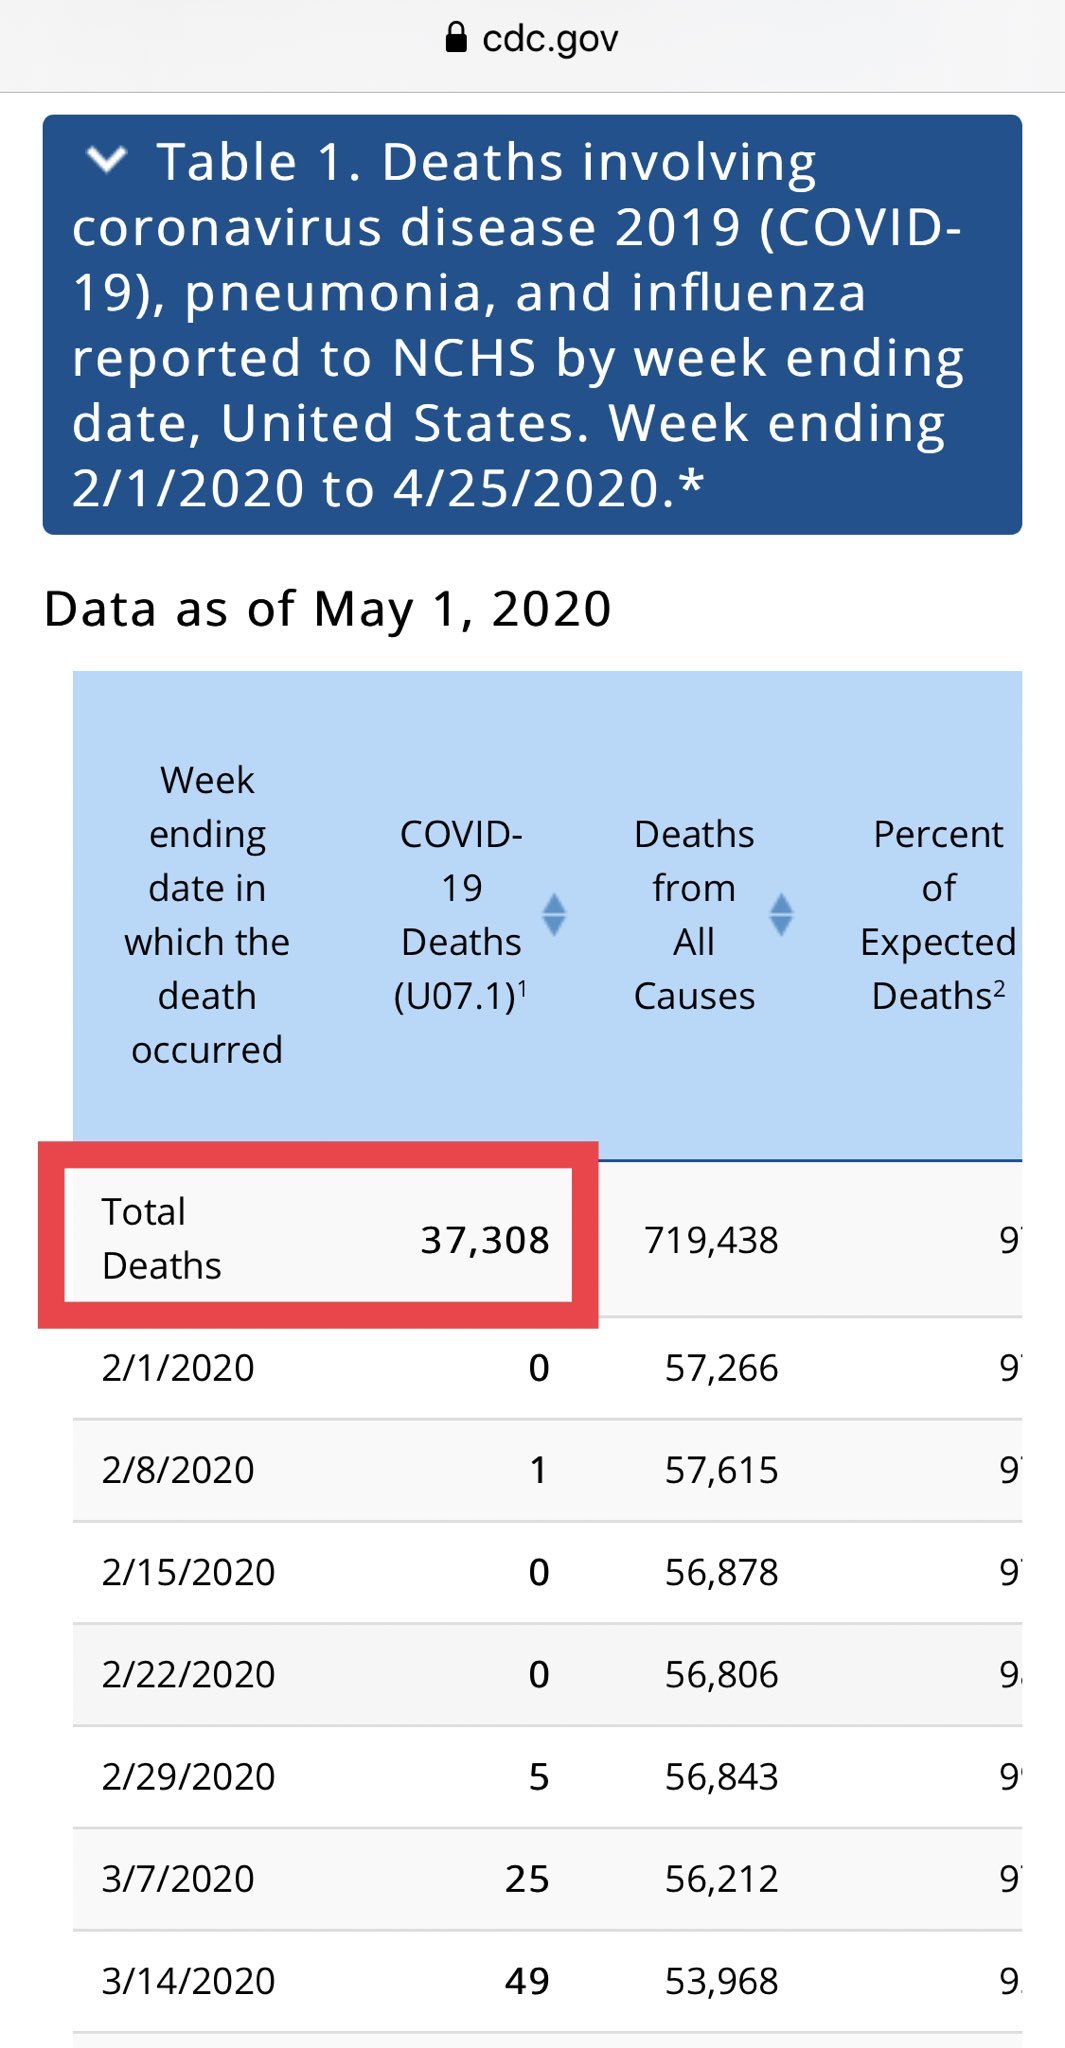 John Cardillo auf Twitter: "I’m well aware of the CDC “lag times” but this isn’t that, so stop with that excuse for these numbers. They’ve separated out other illnesses that were the actual causes of deaths and now the mortality rate is half of what it was last week. It’s been nothing but a scam.… https://t.co/ooDGb6geBh"